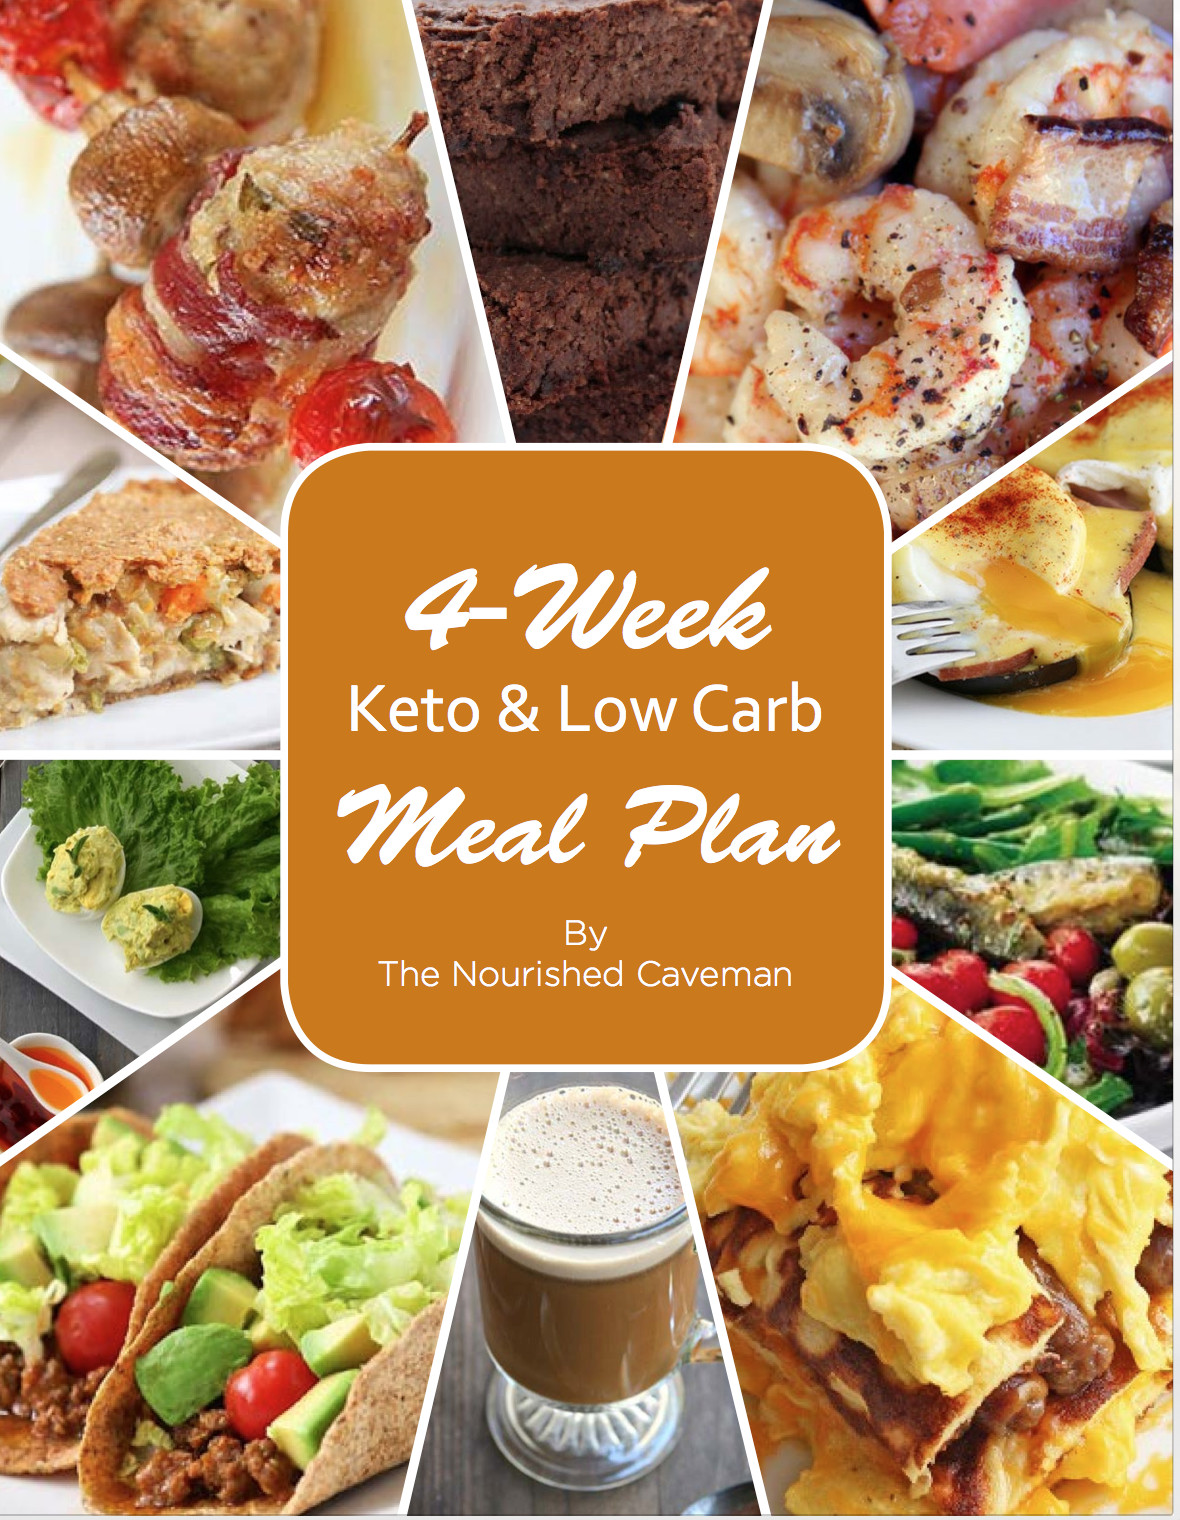 Low Carb Keto Ketogenic Diet
 4 Week Keto & Low Carb Meal Plan The Nourished Caveman